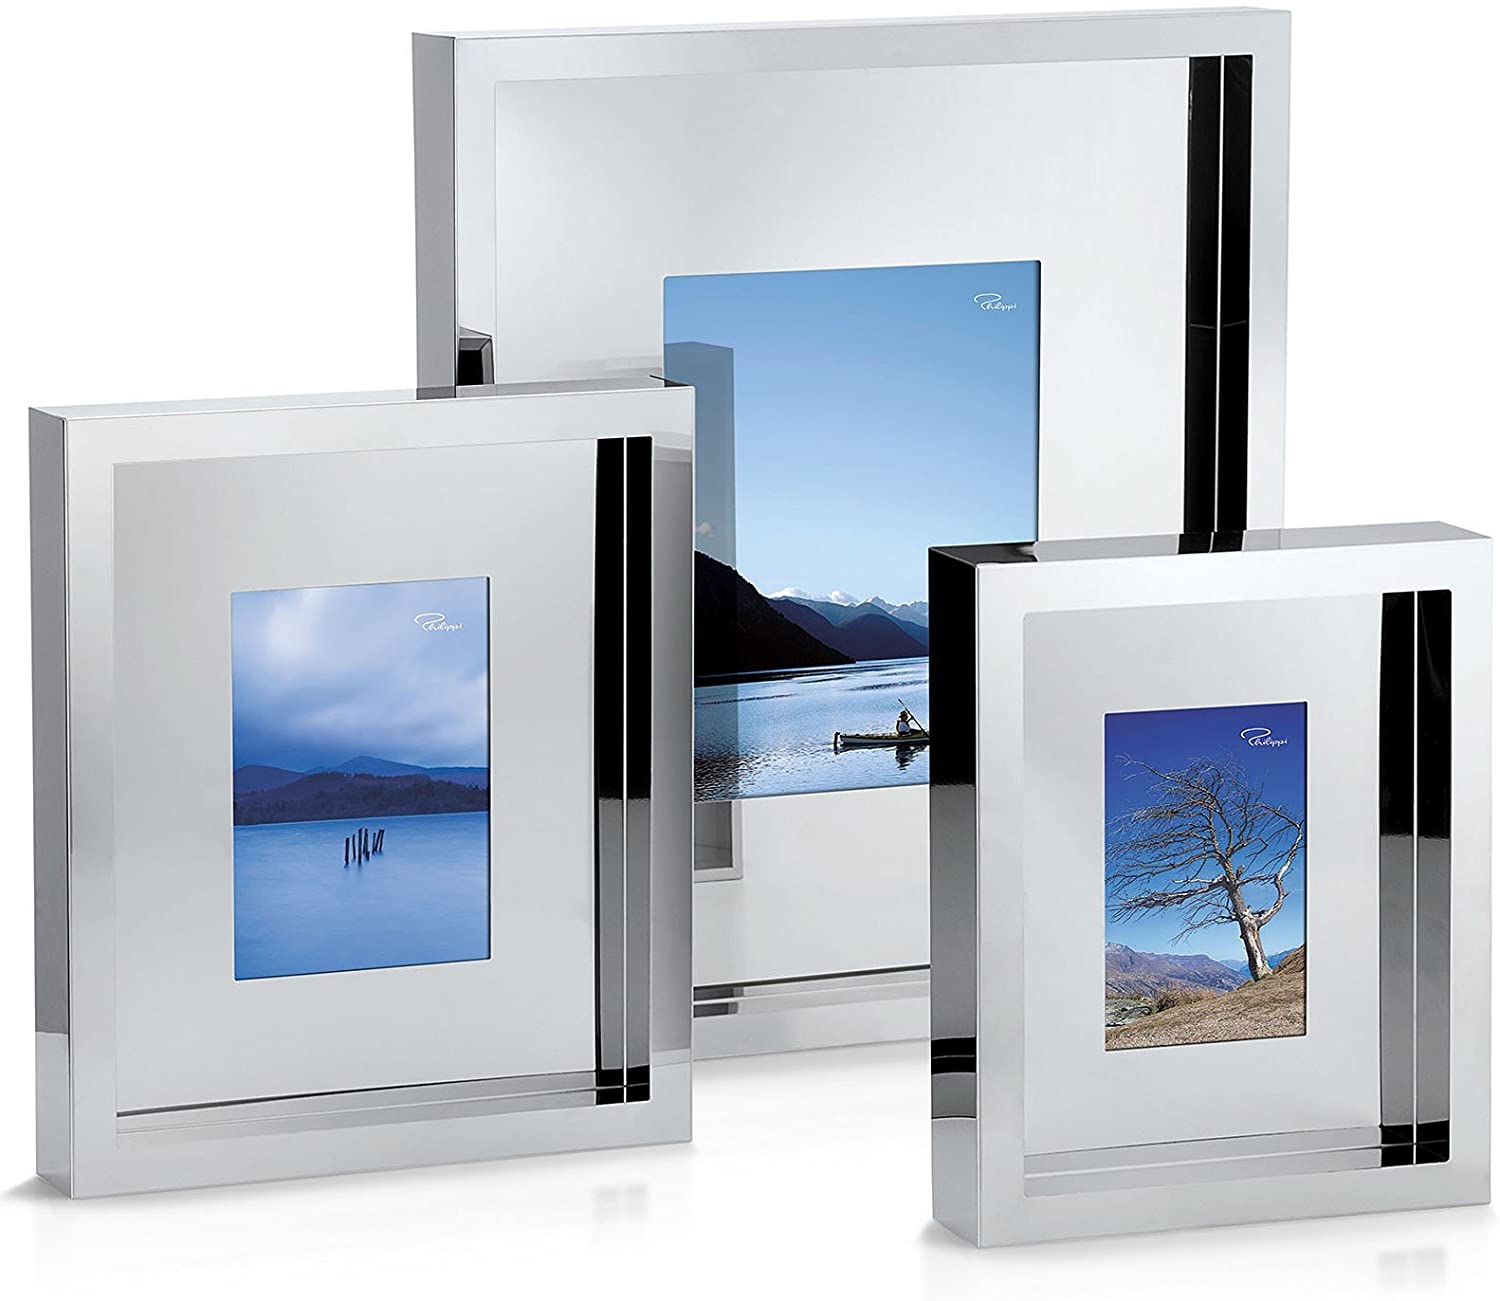 Philippi - LONELY PLANET - Stainless Steel Picture Frame - 10 x 15 cm Format - Incredibly Special Picture Frame with Great Mirror Effects - Minimalist Shape in Perfect Quality - Available in 3 Sizes